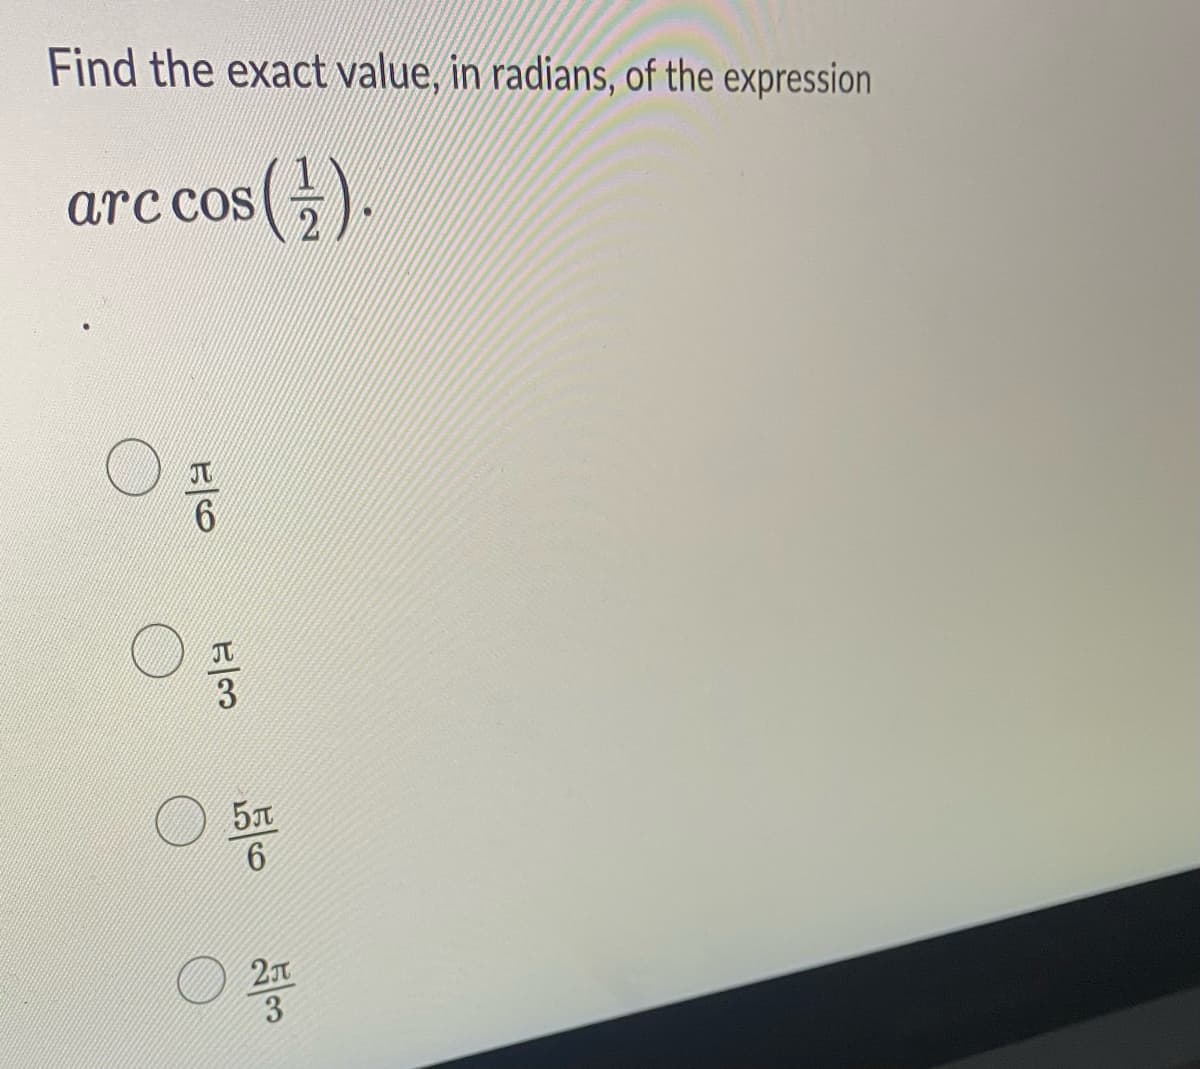 Find the exact value, in radians, of the expression
s().
arc cos
ㅇ
E60
0
la
ㅇ
5T
6
2π
3